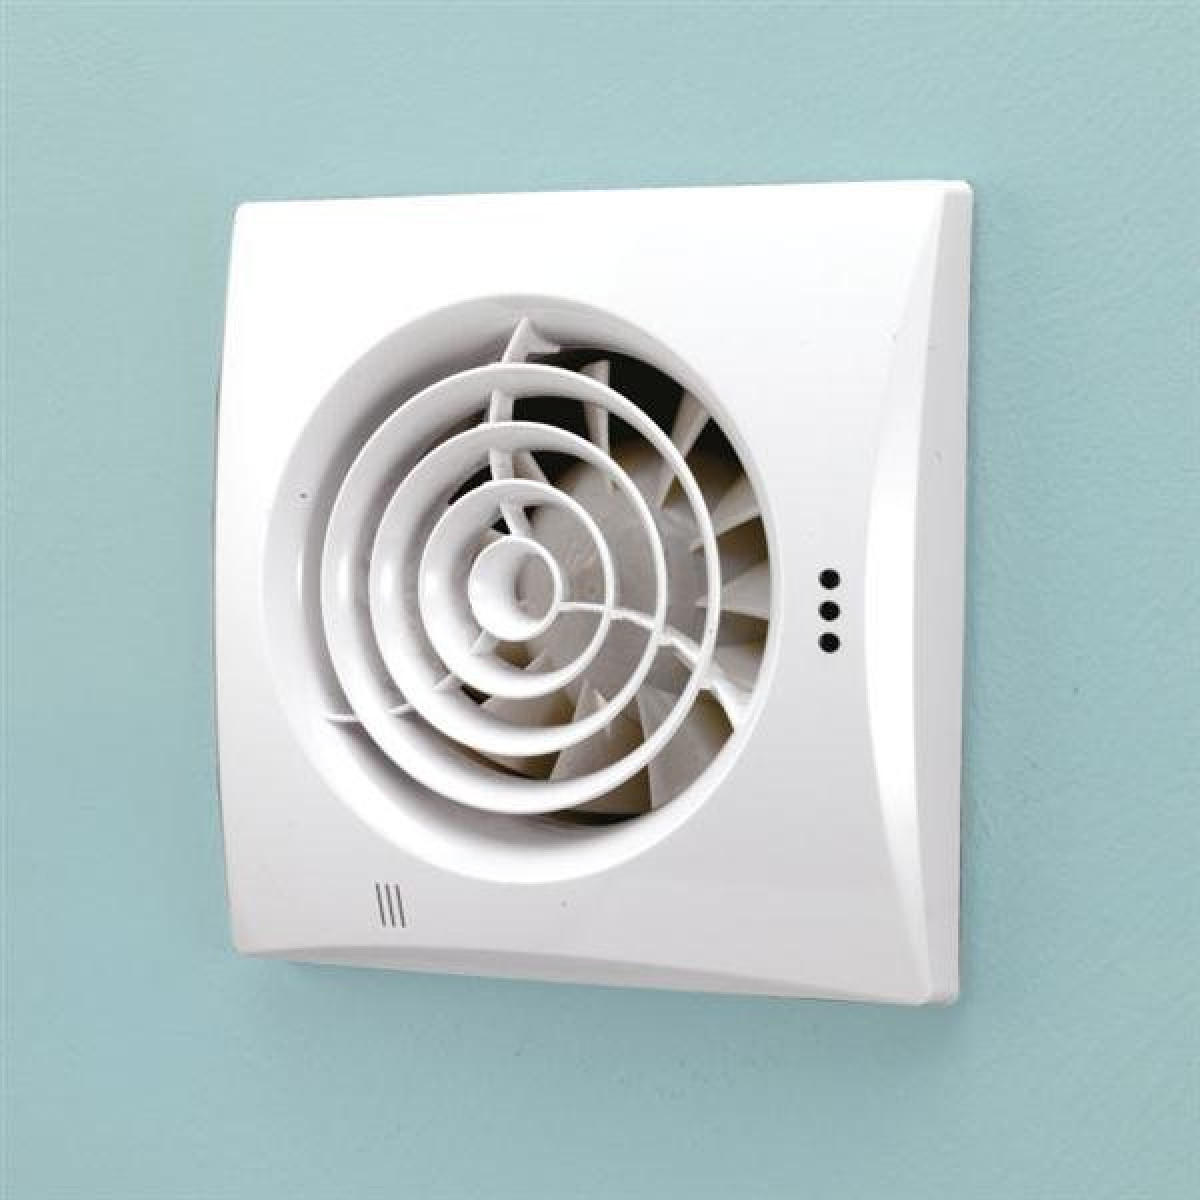 HiB Hush extractor fan in white with timer | 31500